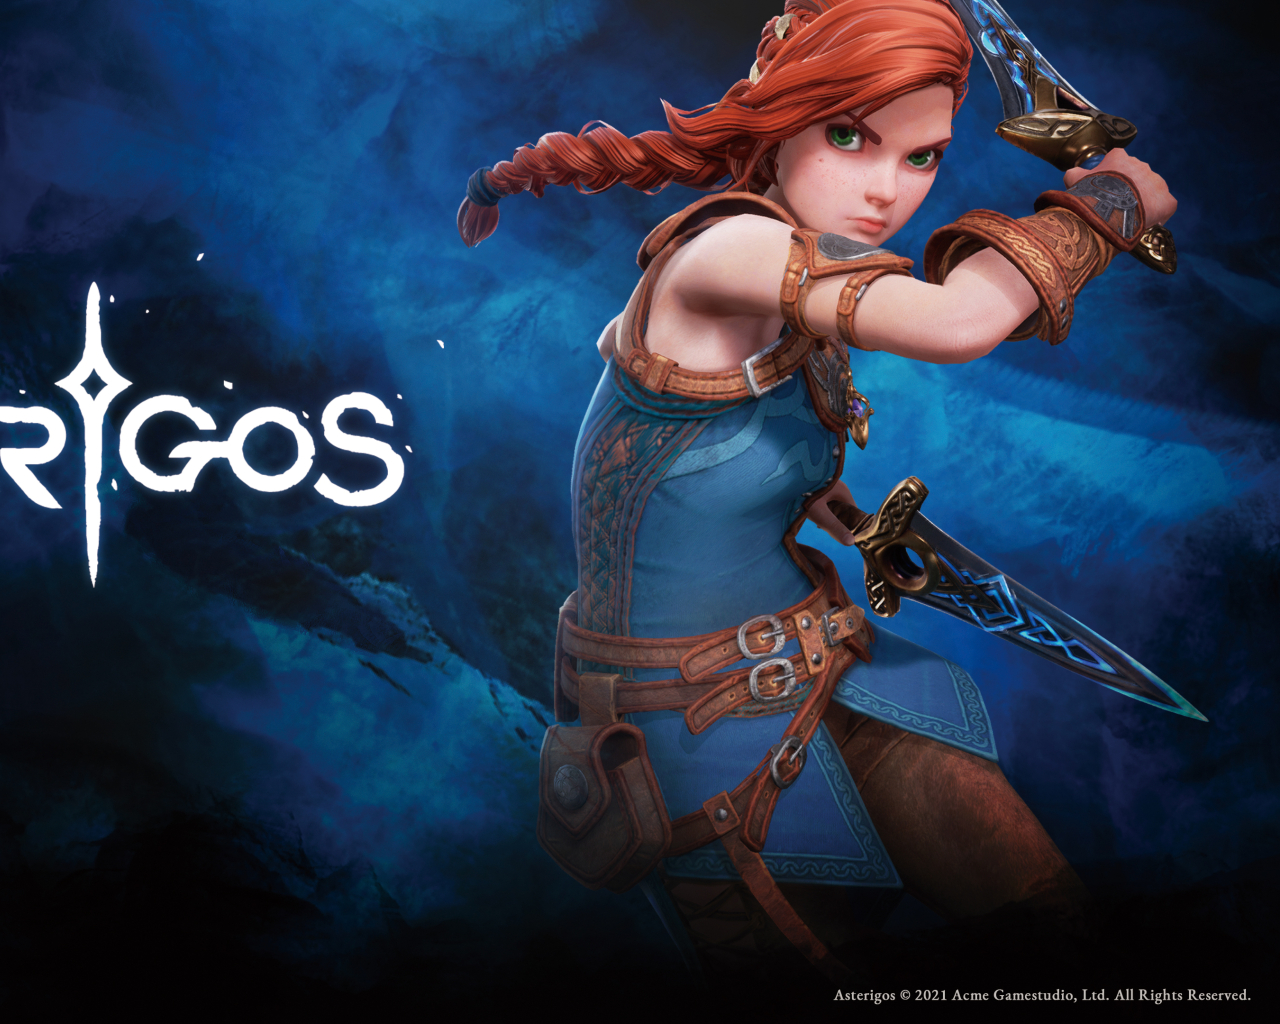 Asterigos: Curse of the Stars download the new version for apple